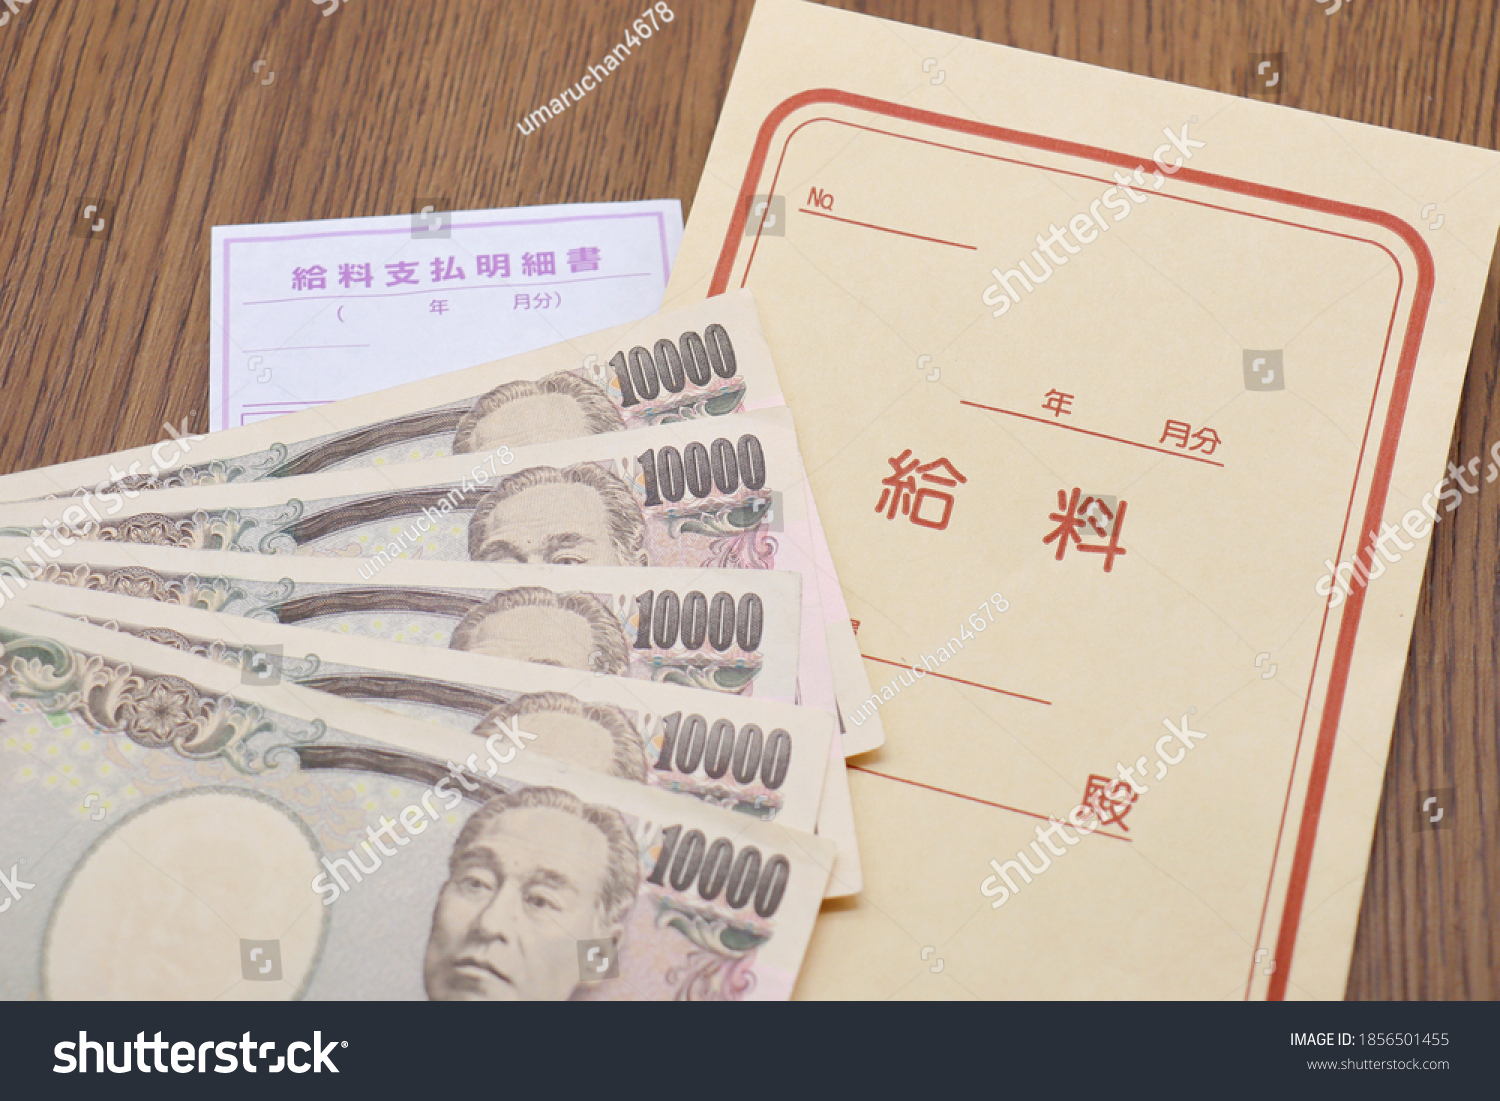 Japanese salary bag and 10,000 yen bill. Translation: Year, Month, Salary, Dear, Pay slip, Year, Month. #1856501455